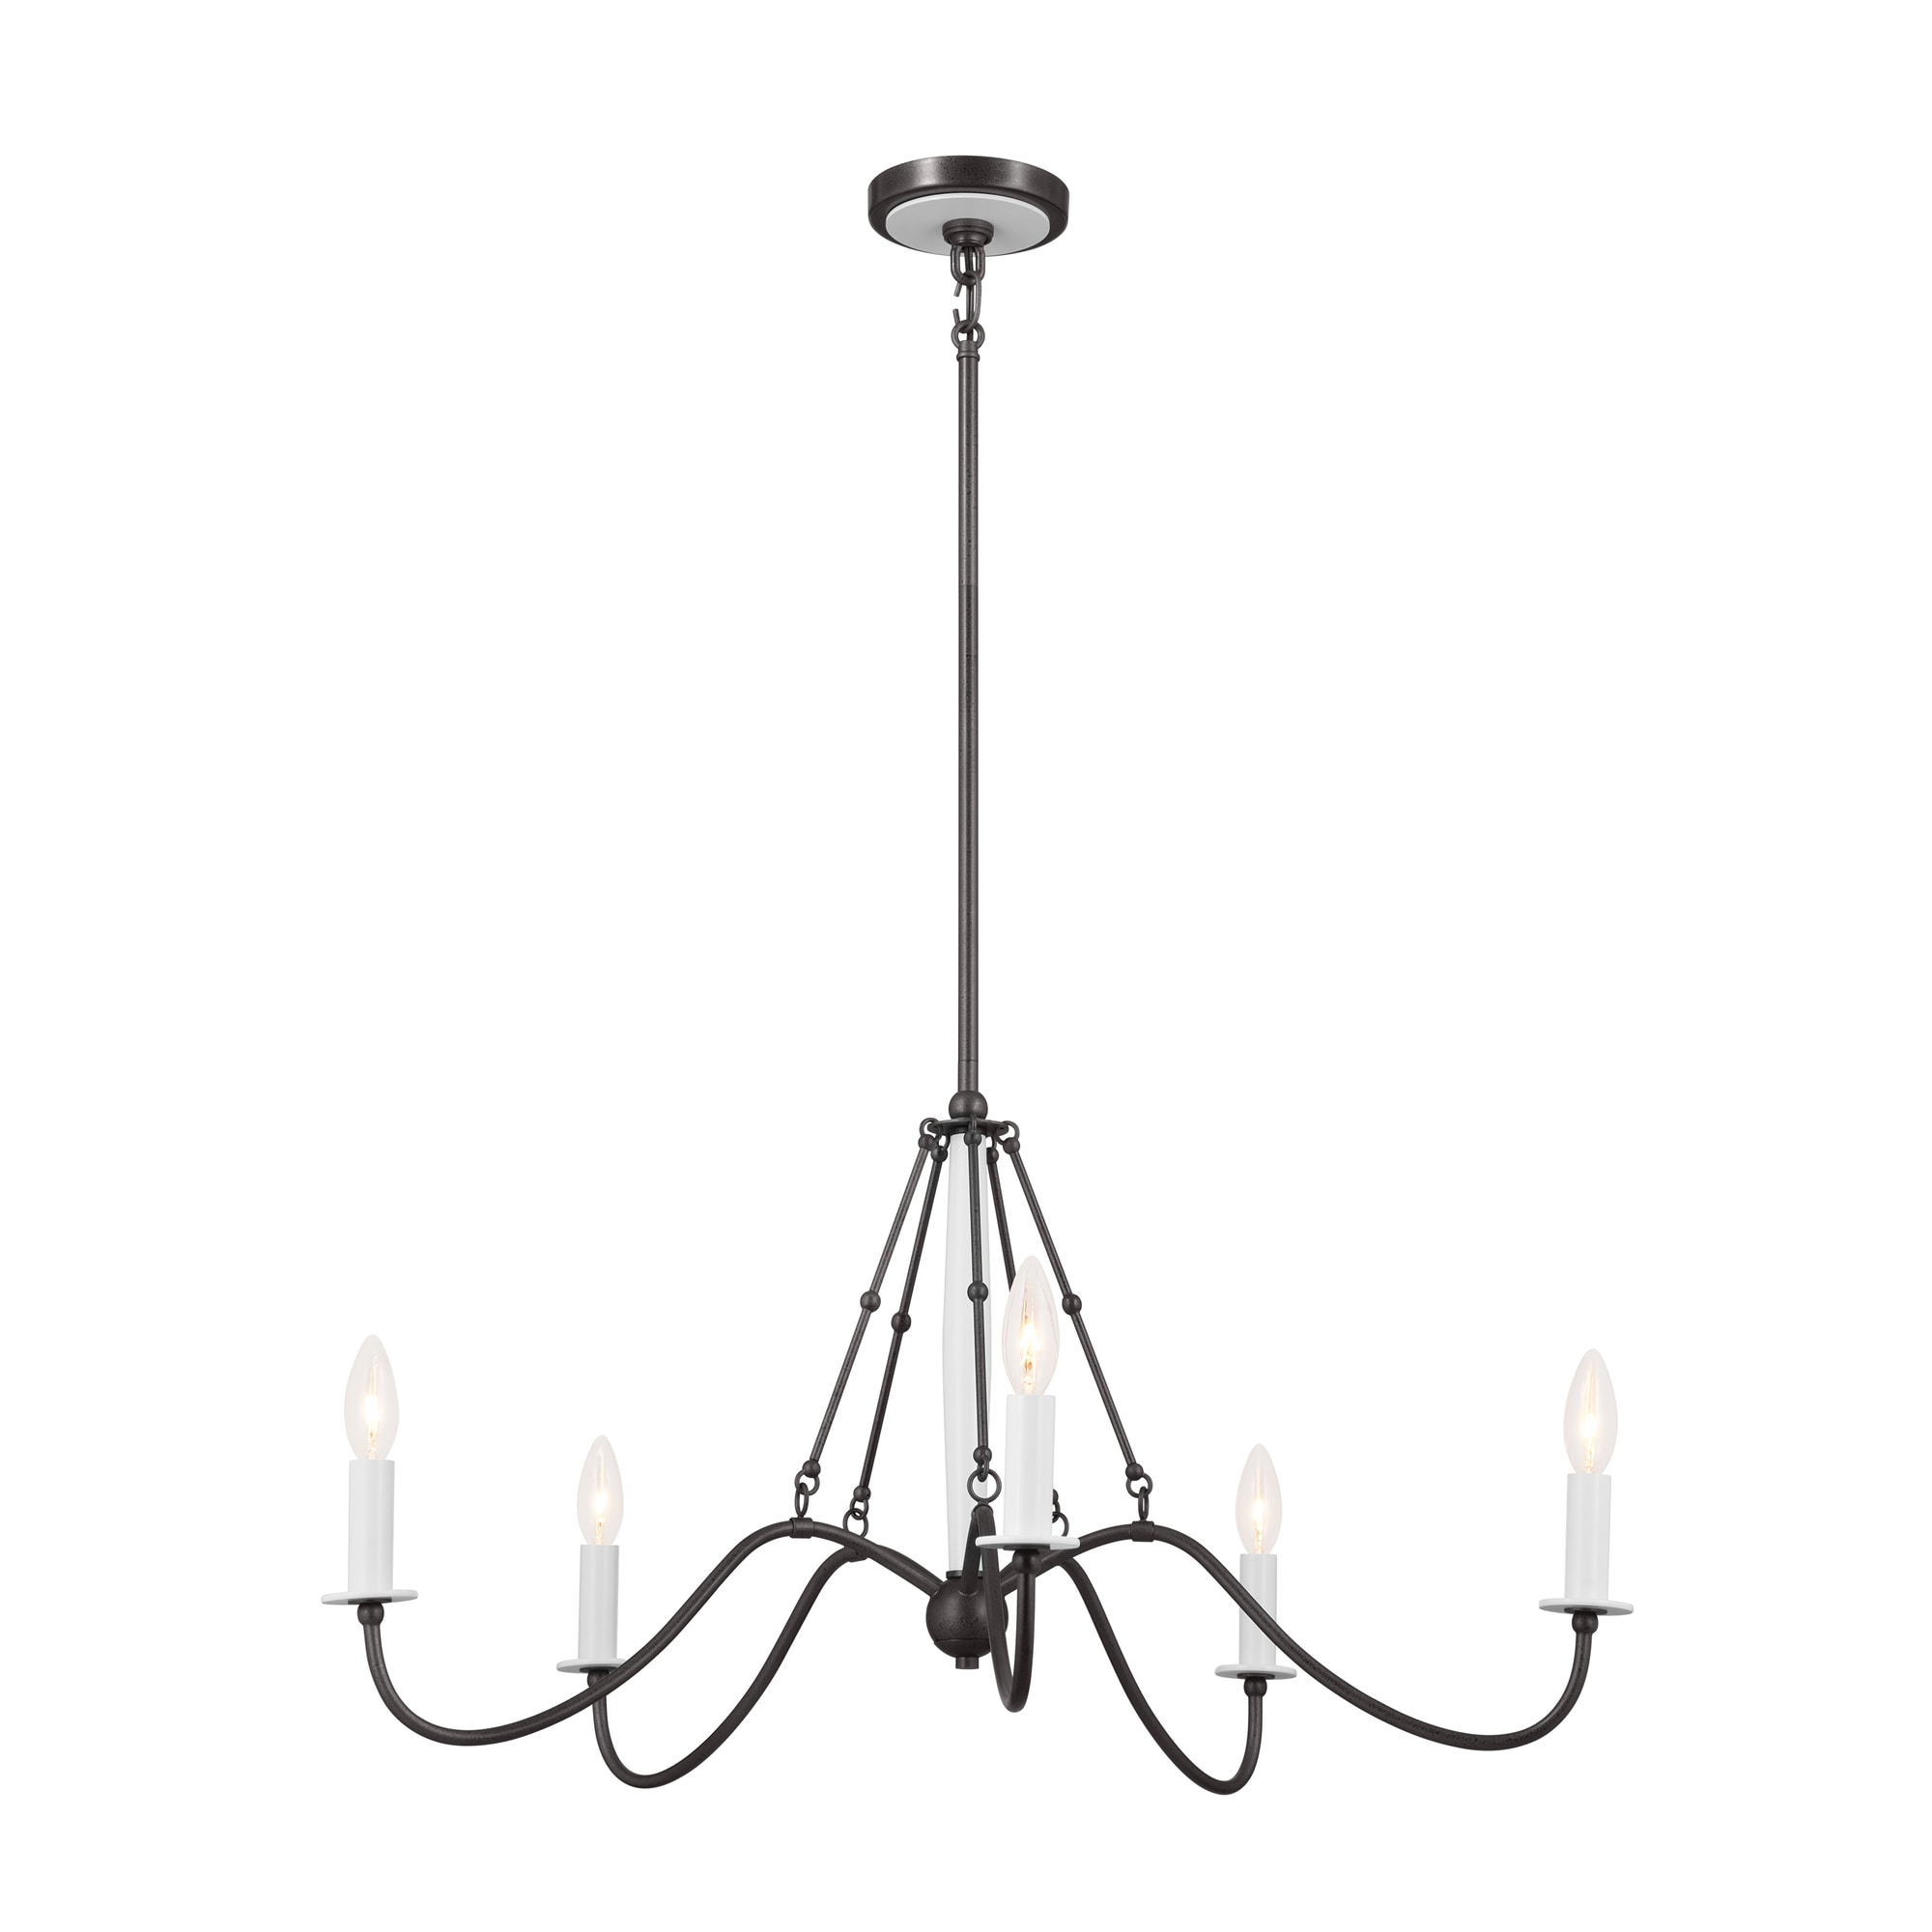 Kichler Freesia 5-Light Anvil Iron Farmhouse Dry rated Chandelier in ...